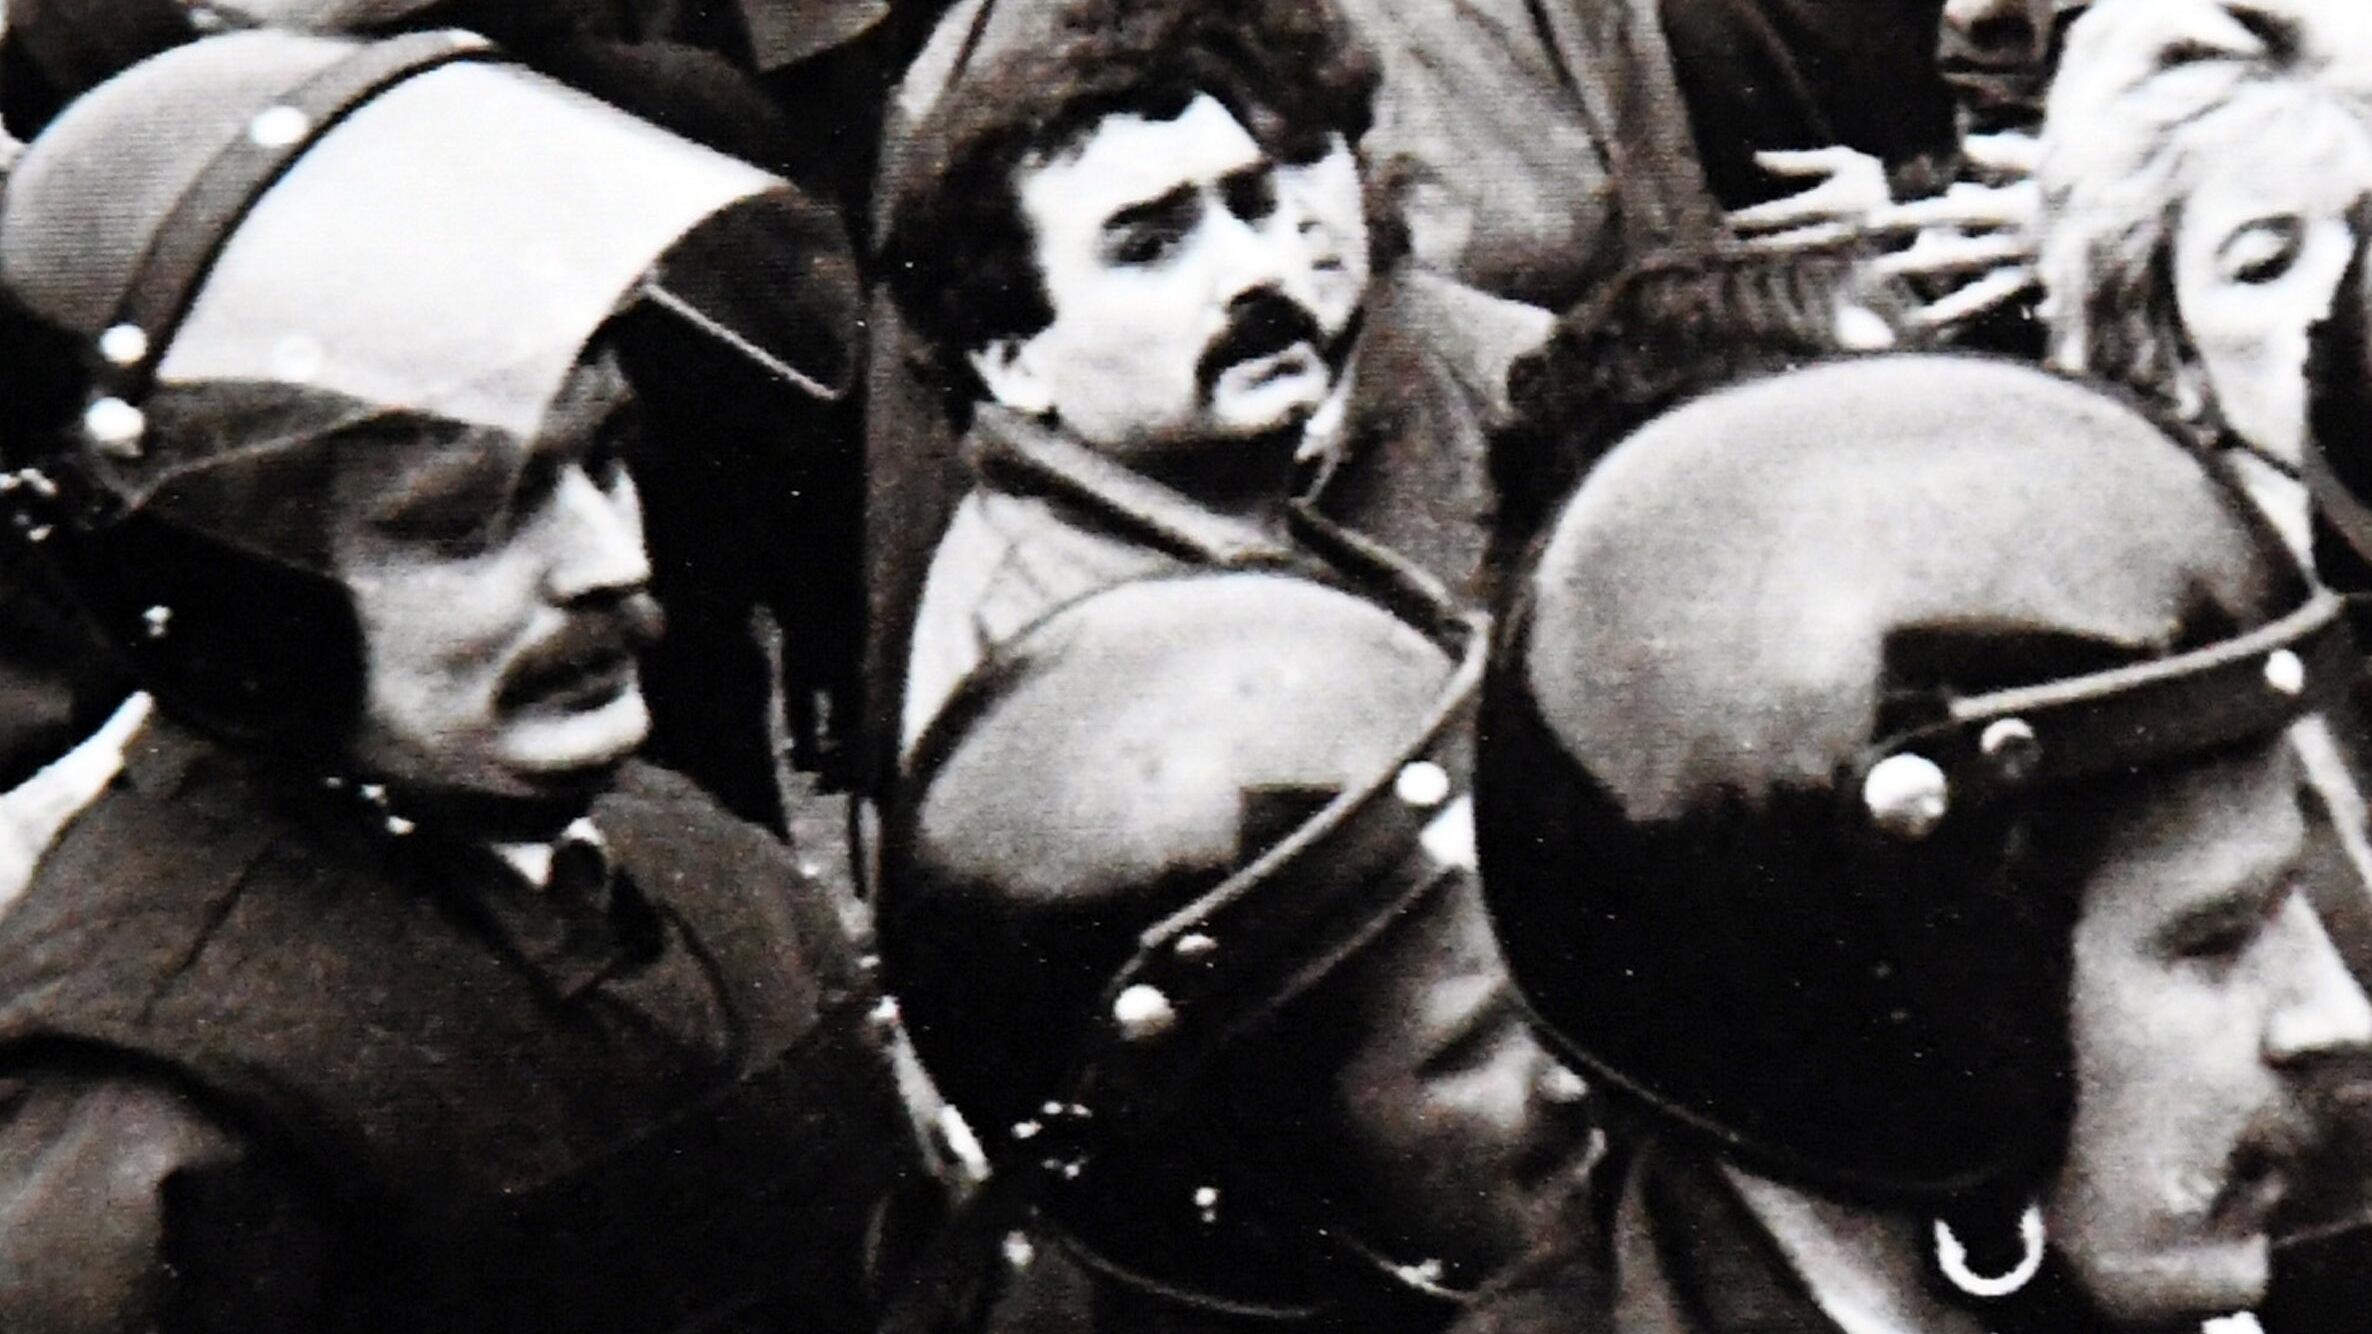 Alan Lewis - PhotopressBelfast.co.uk           8-2-2024
Alfredo Scappaticci the former provisional IRA informer codenamed Stakeknife.
The PPS today said thatas a result of Operation Kenova there would be no prosecutions mounted against four people including 2 former military intelligence officers and two IRA members.